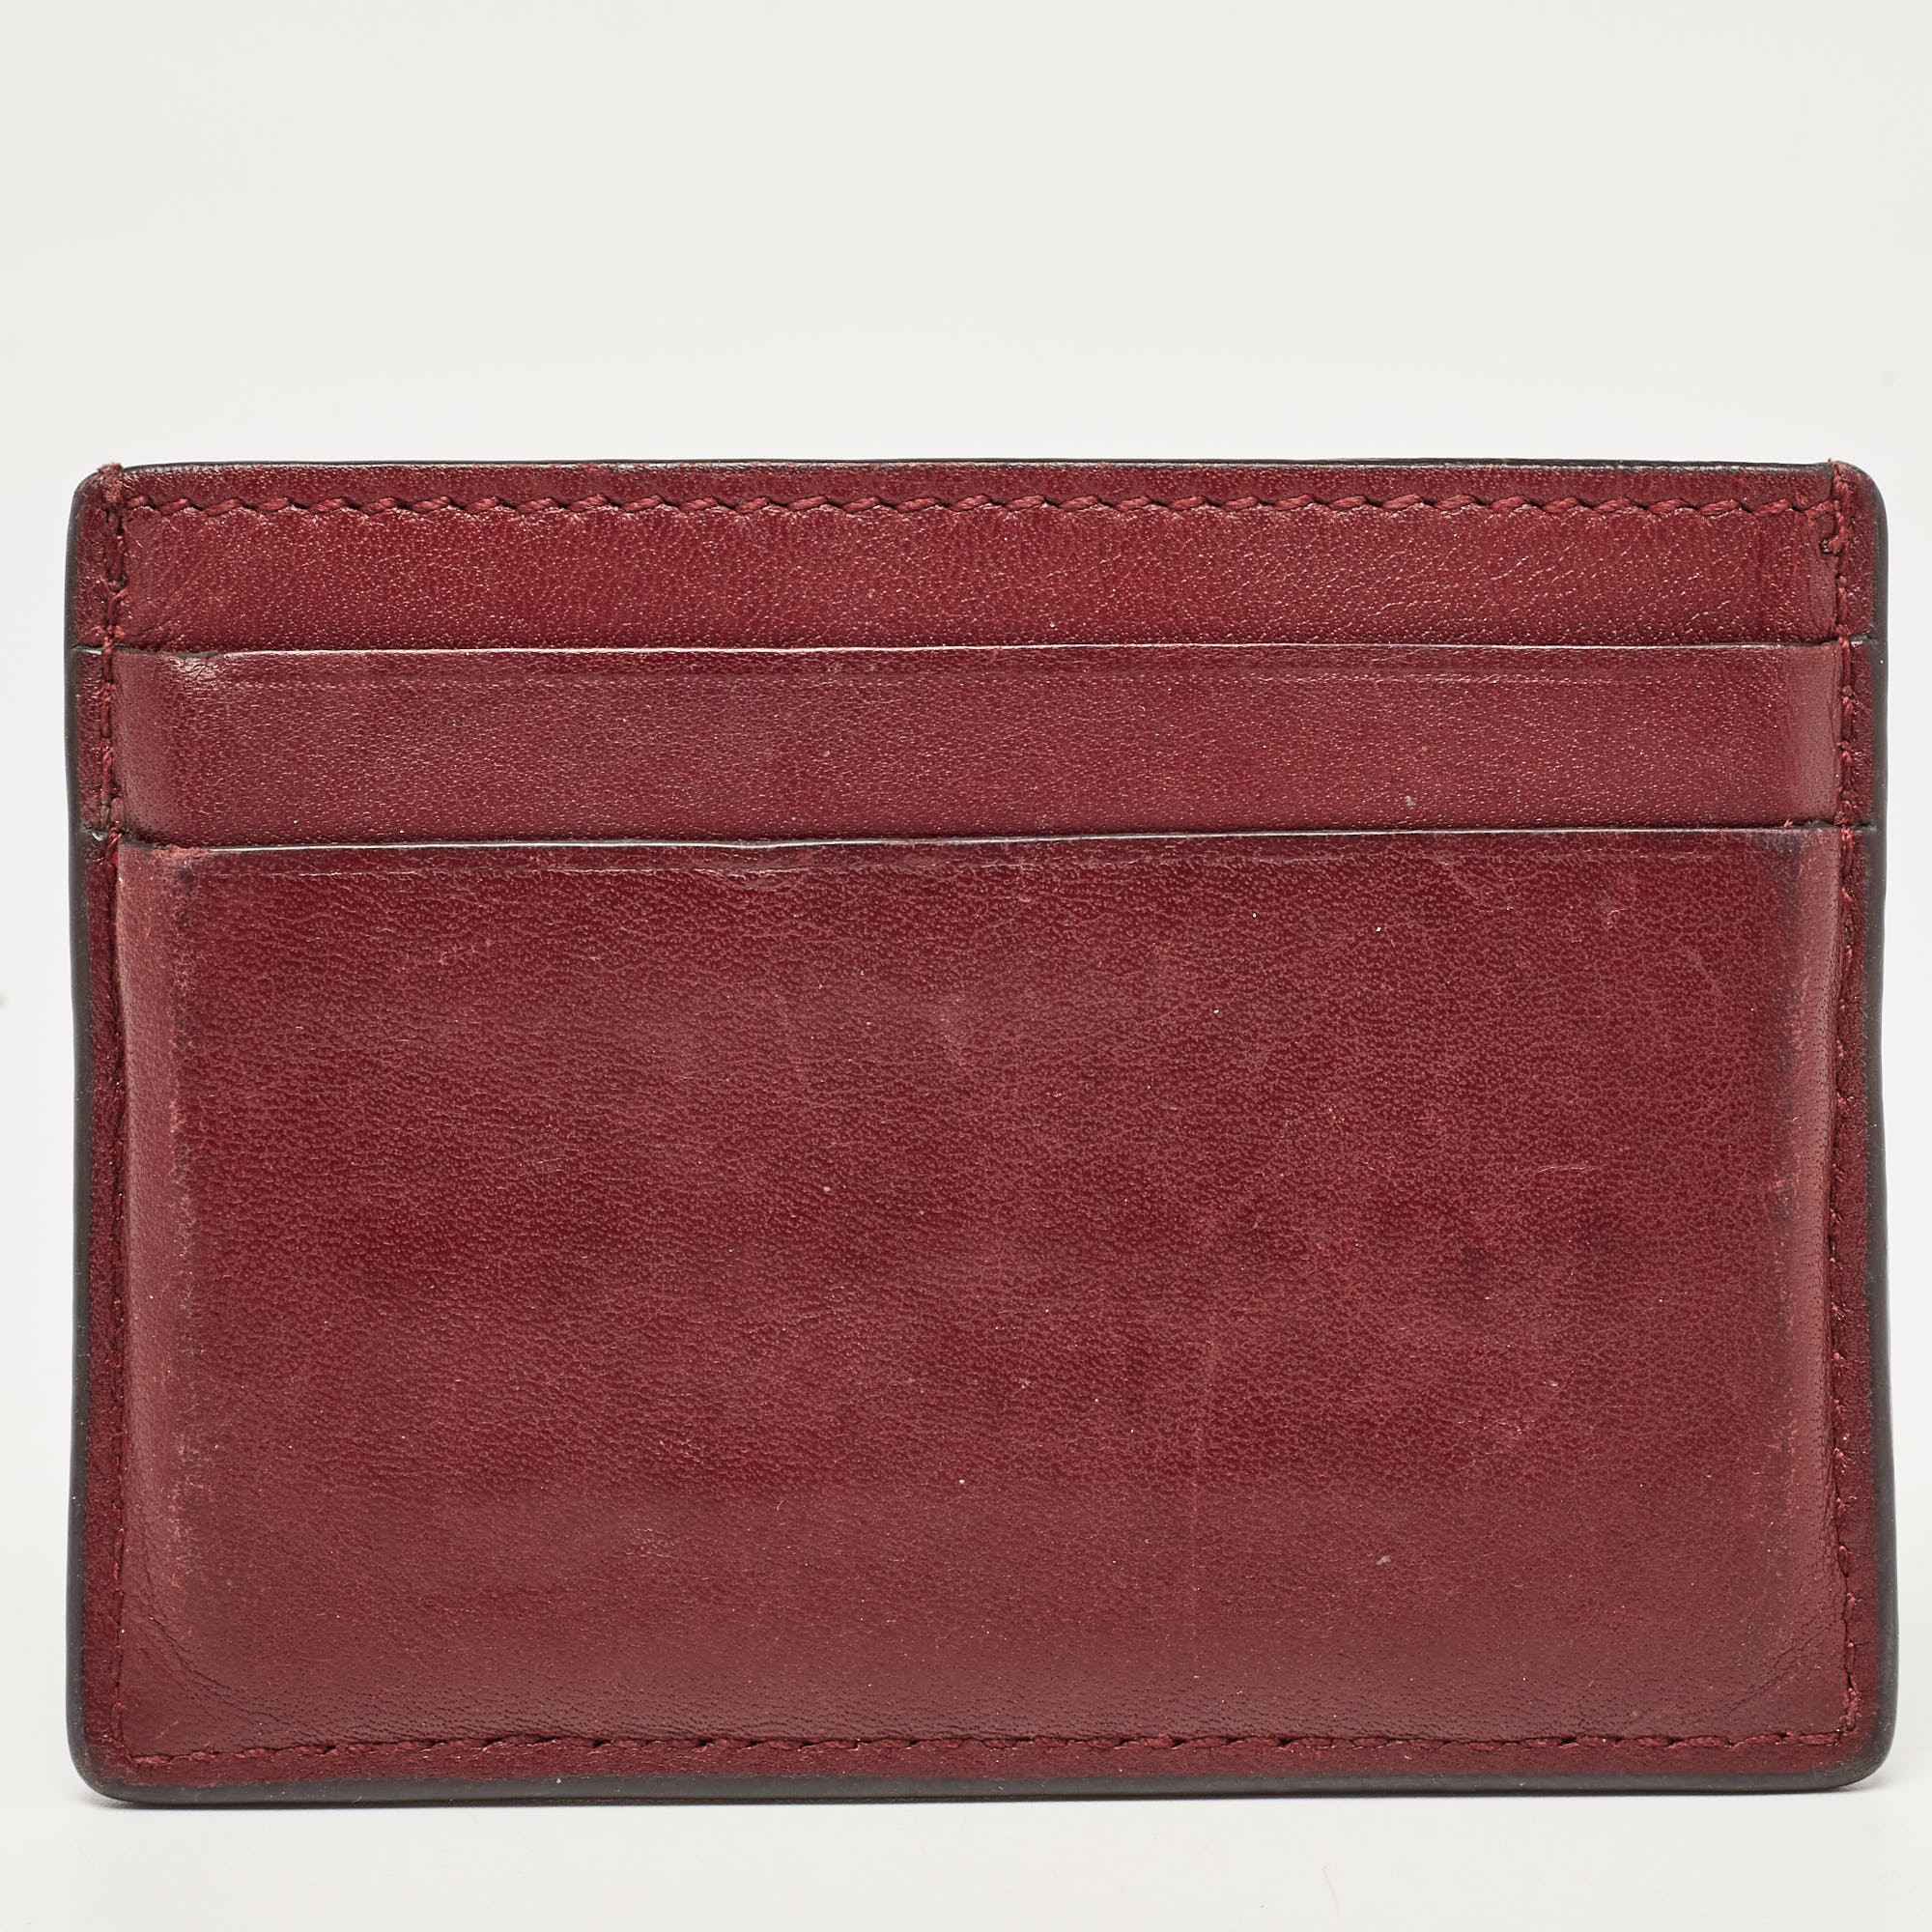 Gucci Red/Burgundy Microguccissima Leather Card Holder